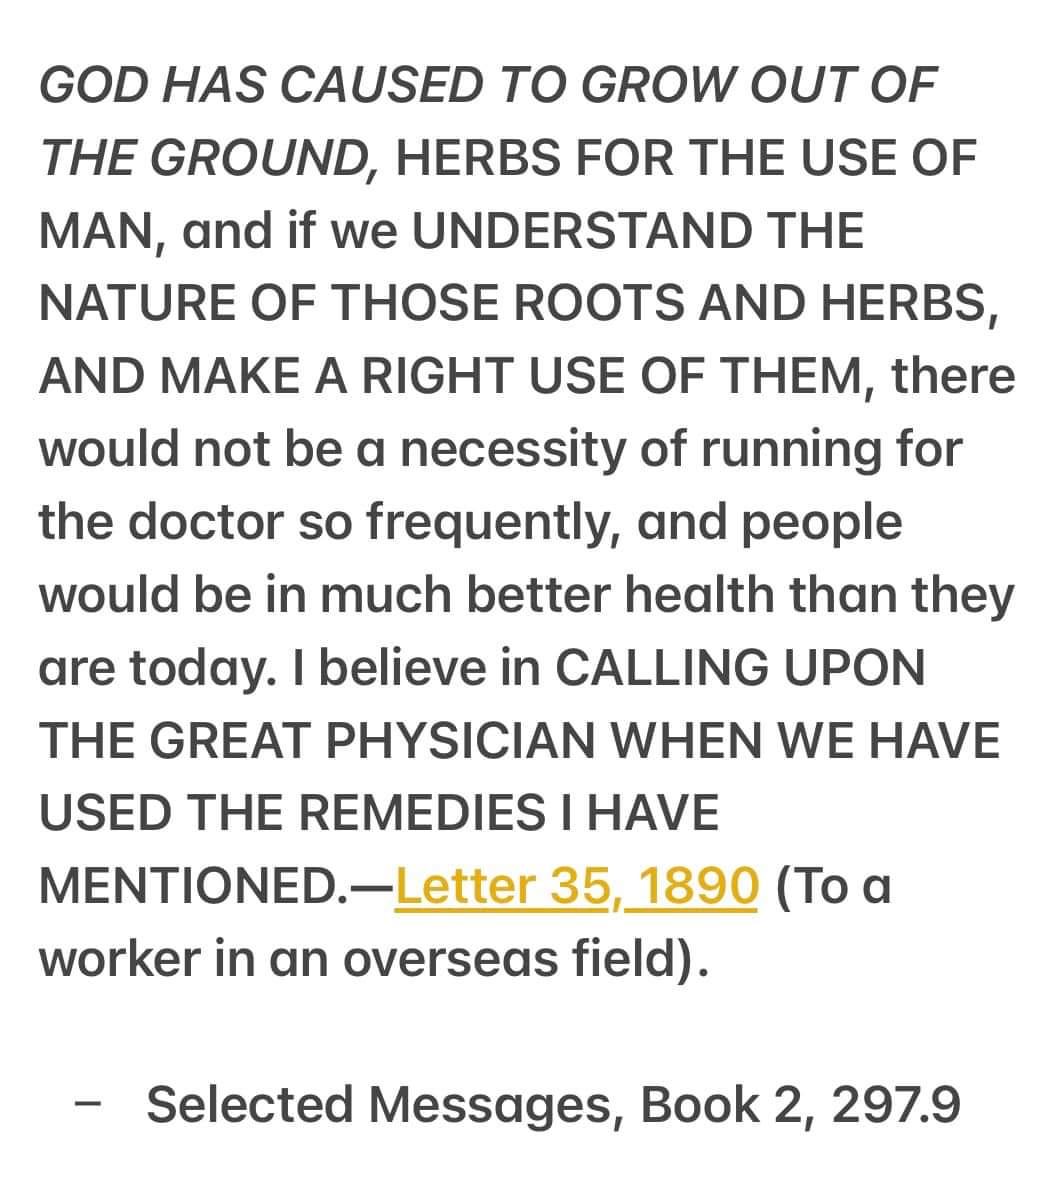 Remedies and the Great Physician m.egwwritings.org/en/book/99.178… #great #physician #herbs #plants #remedy #truth #AdventistYouth #ellenwhite #quoteoftheday #truthbetold #adventistchurch